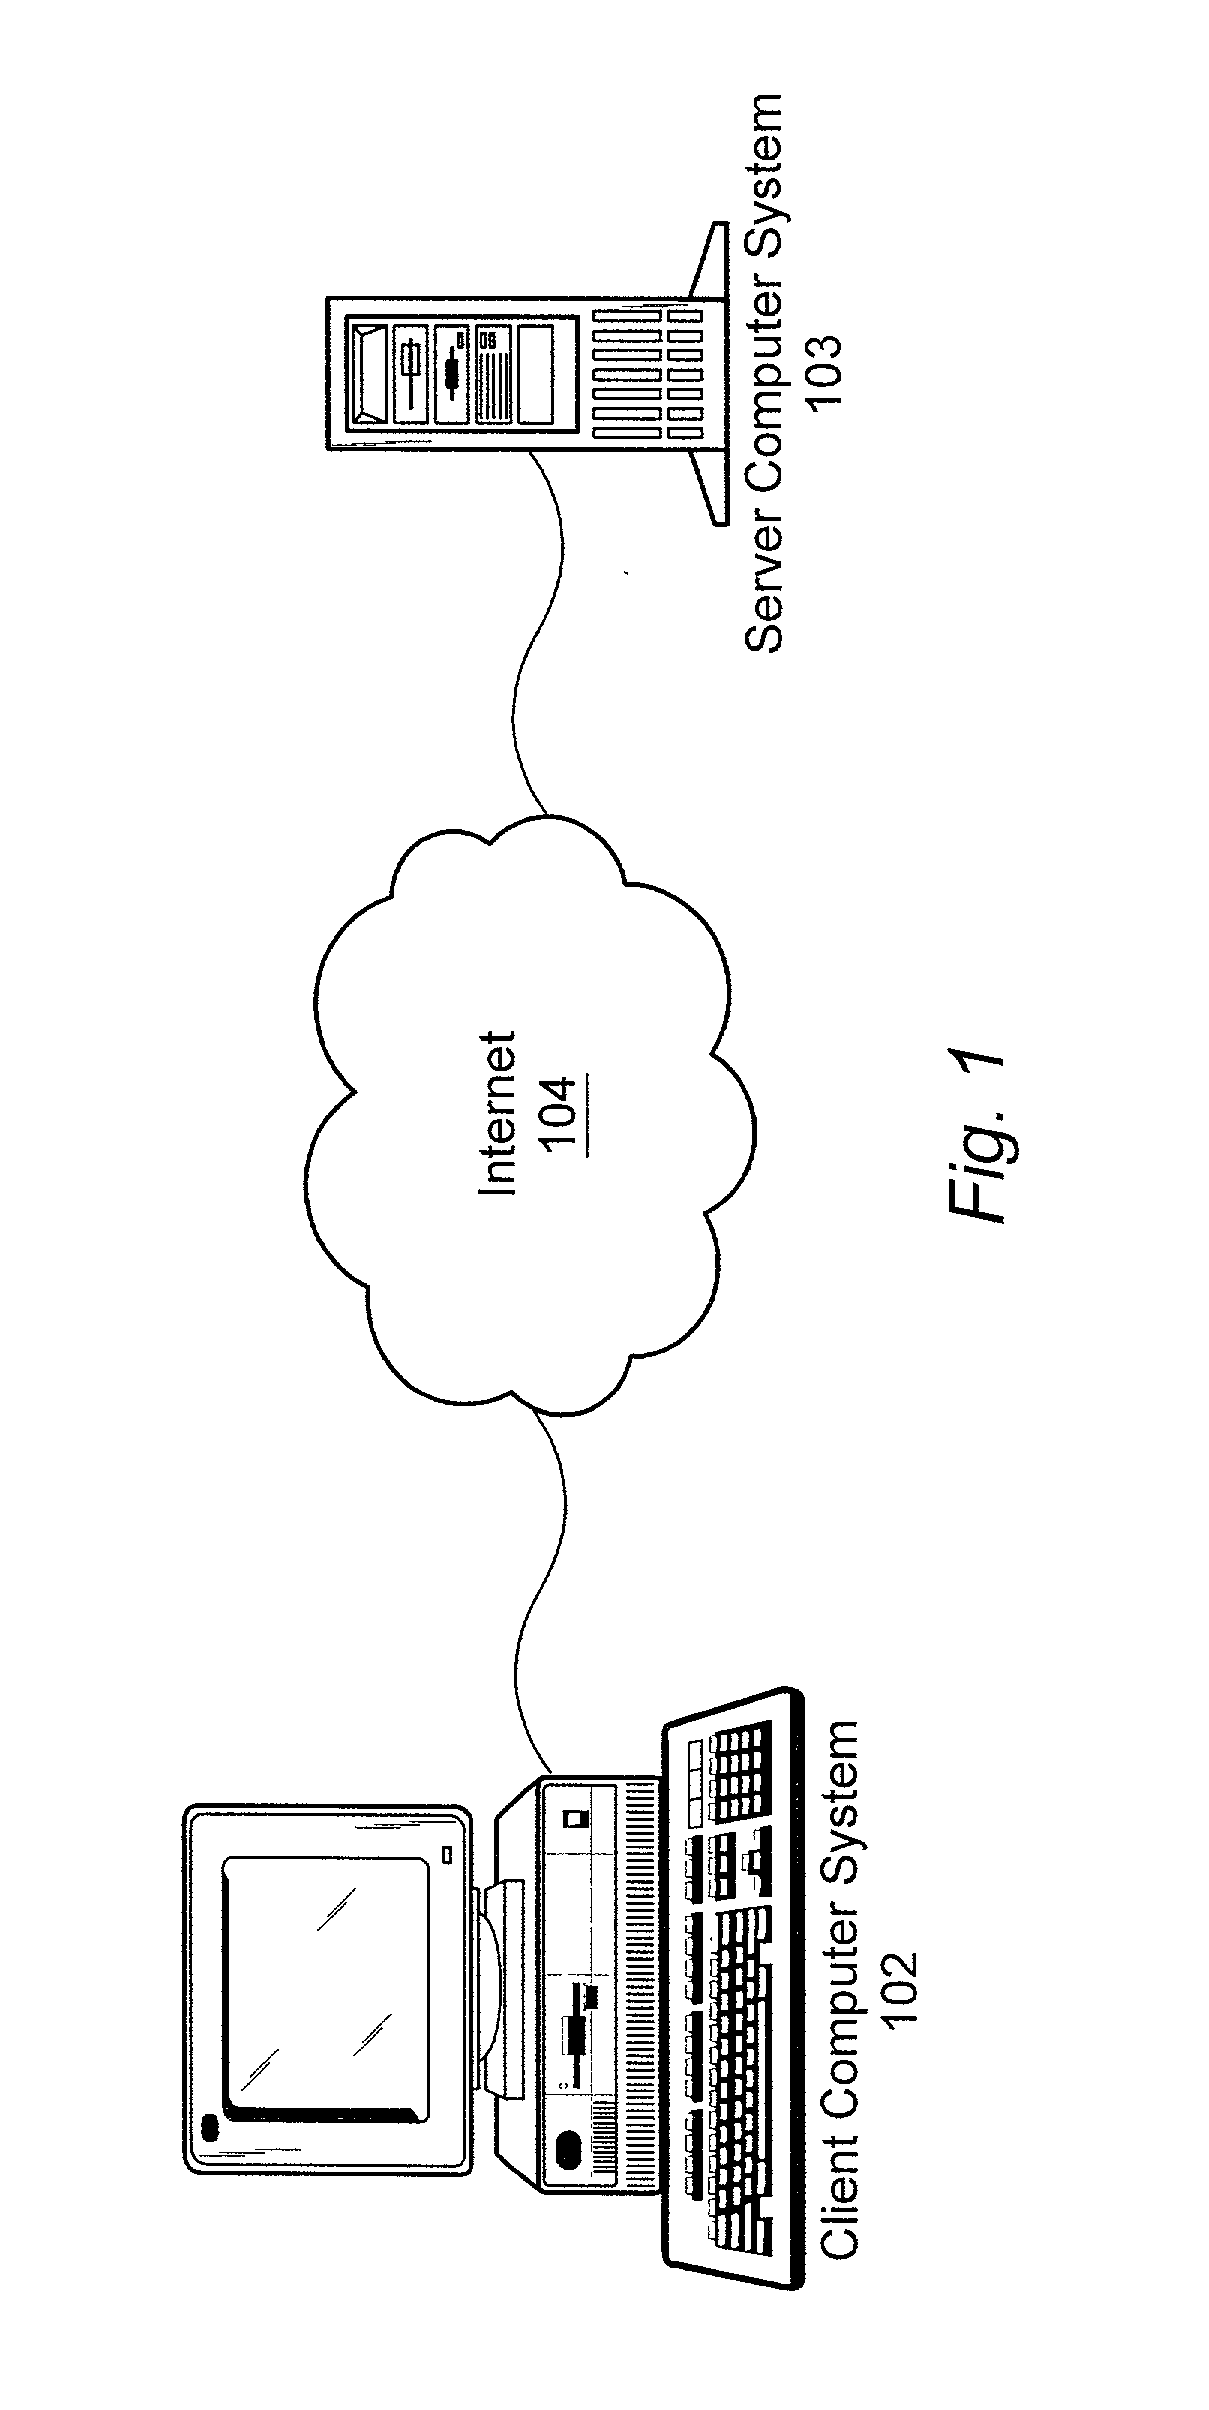 Network-based system for configuring a measurement system using software programs generated based on a user specification